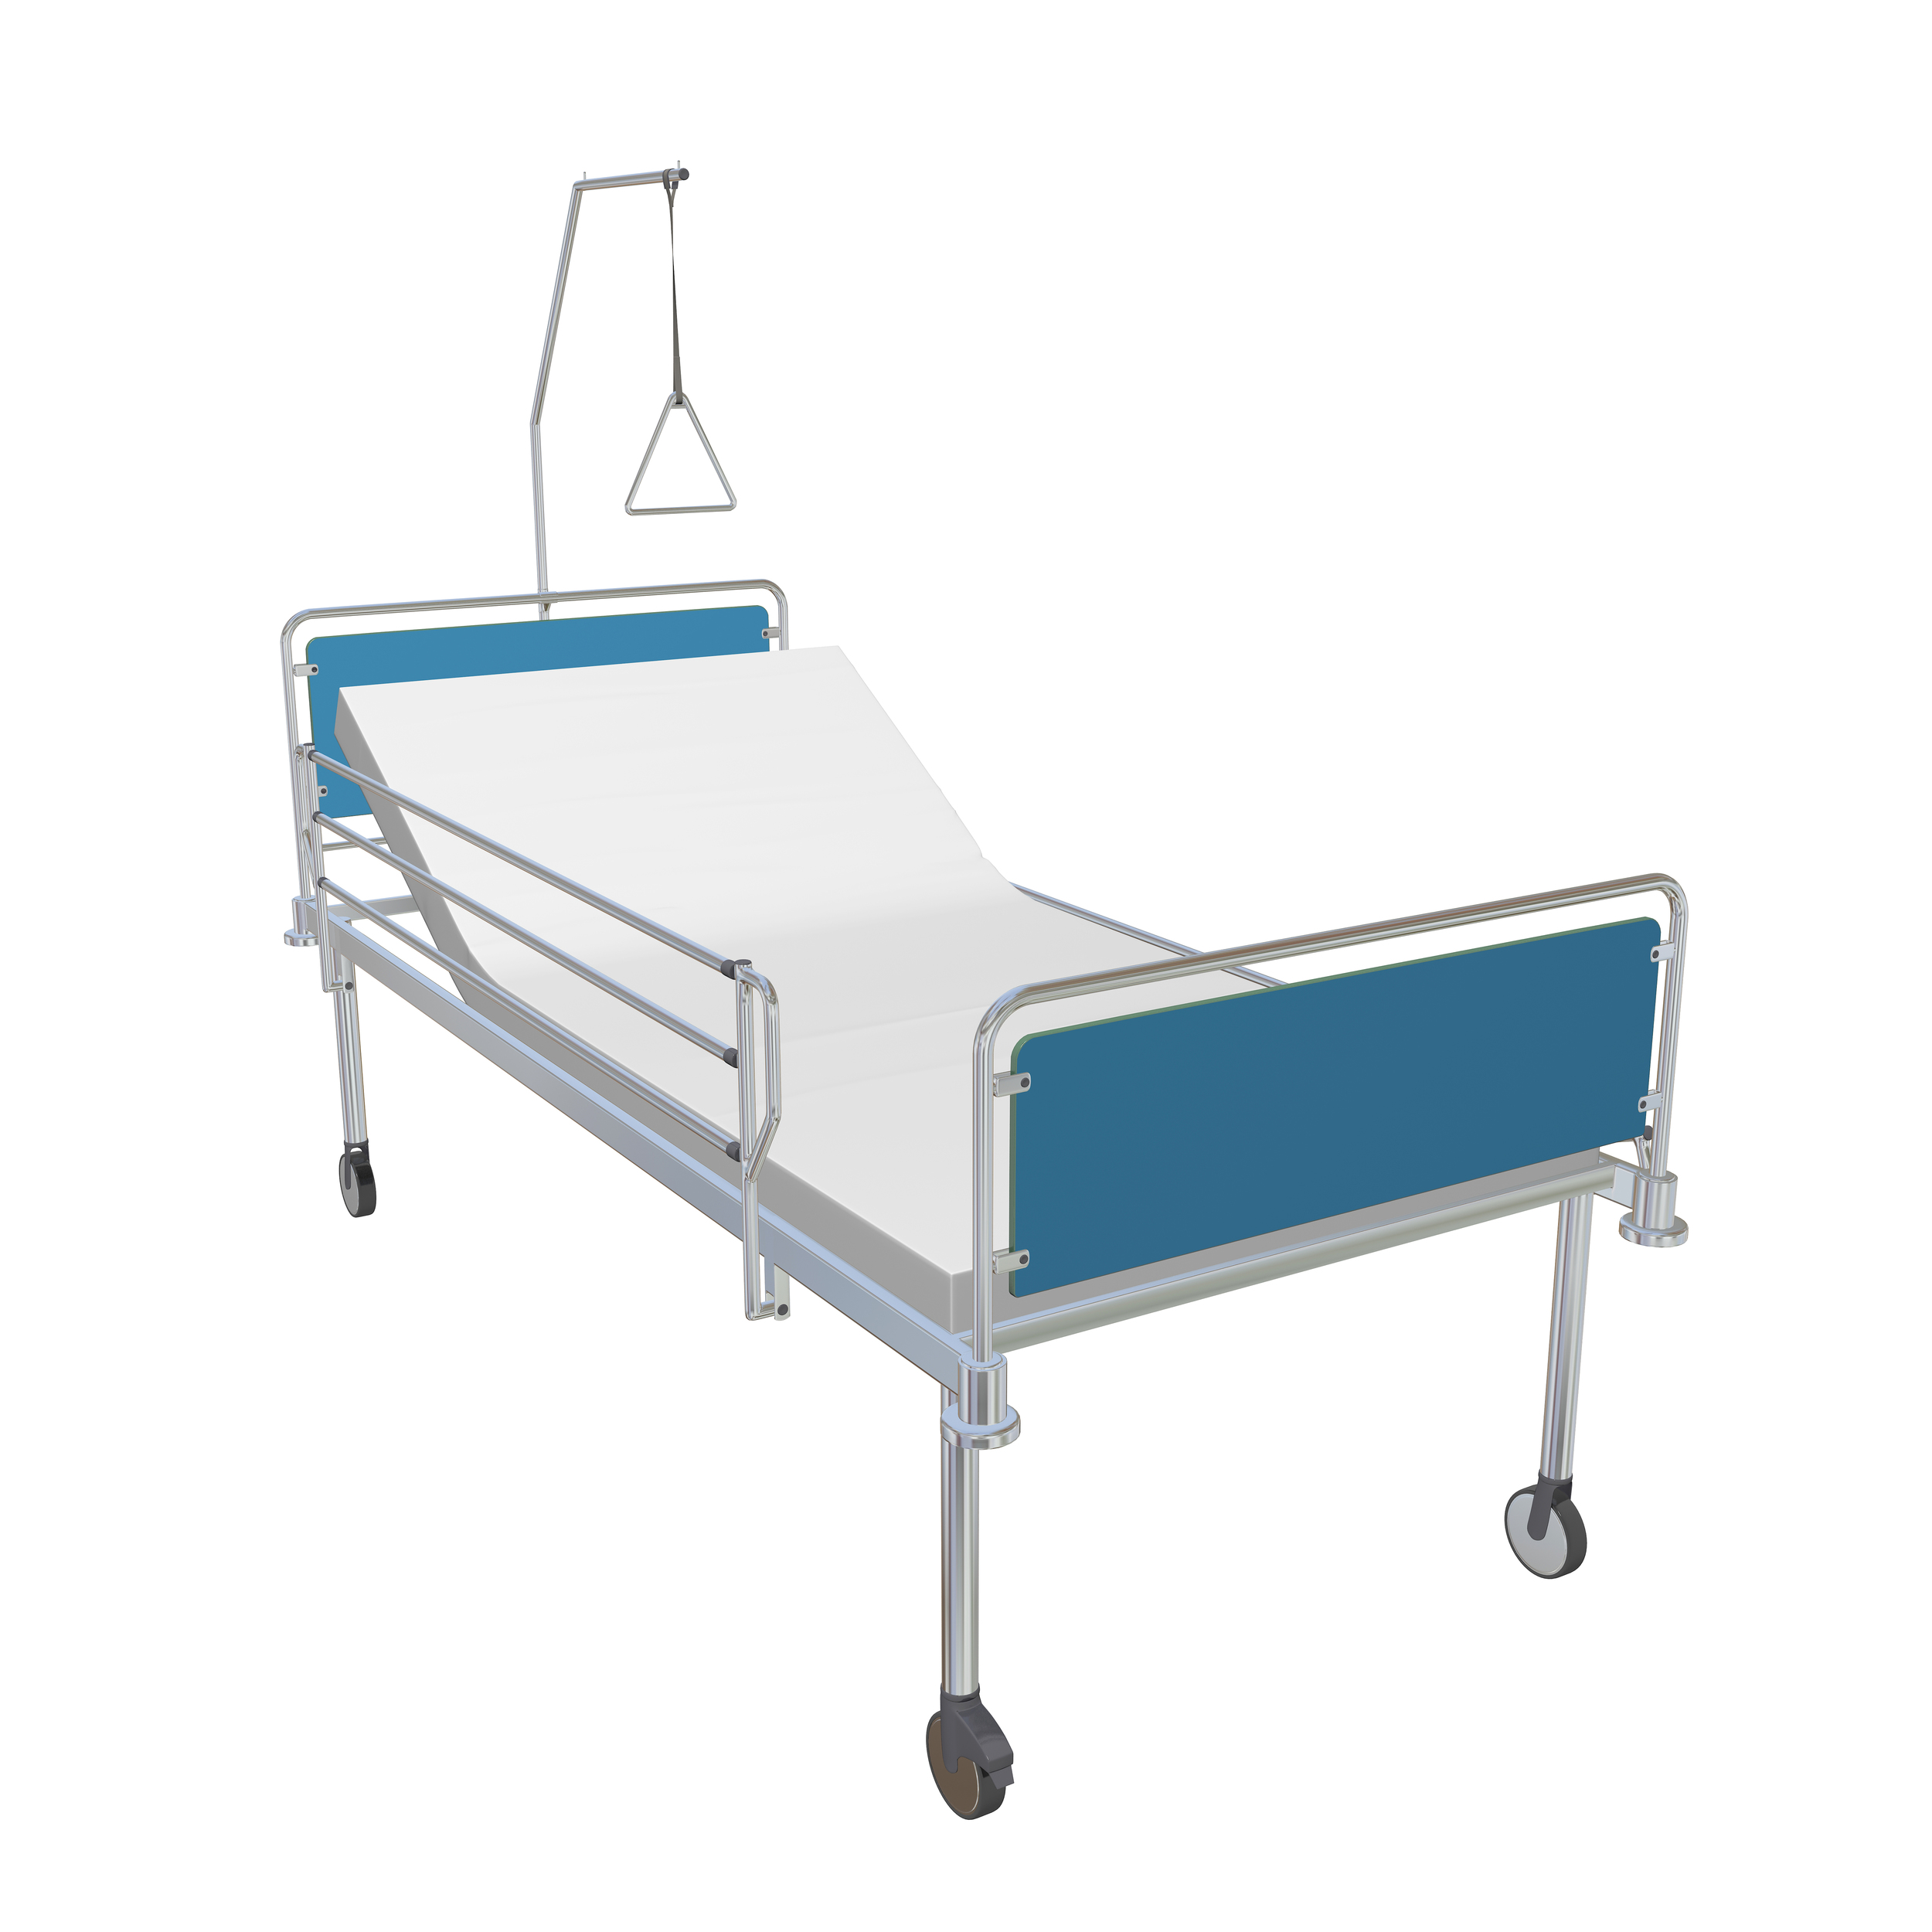 The Best Bed Rails for Seniors - Freedom Care